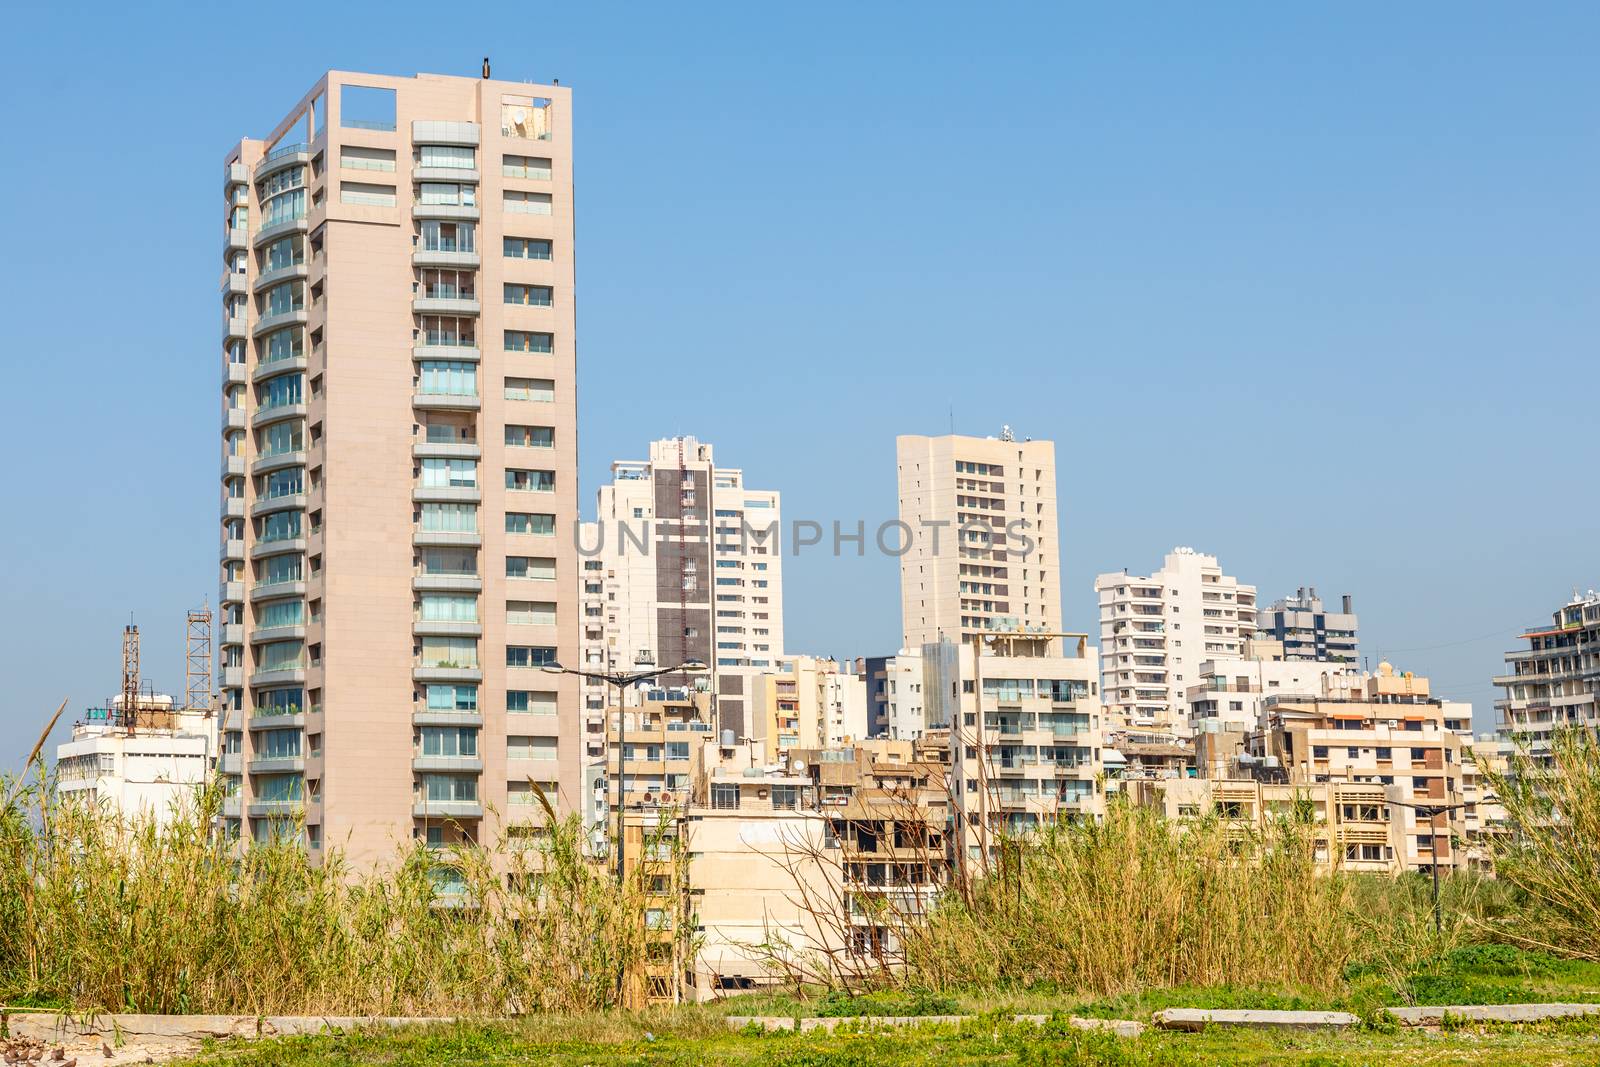 Beirut city living blocks and buildings , Beirut, Lebanon  by ambeon